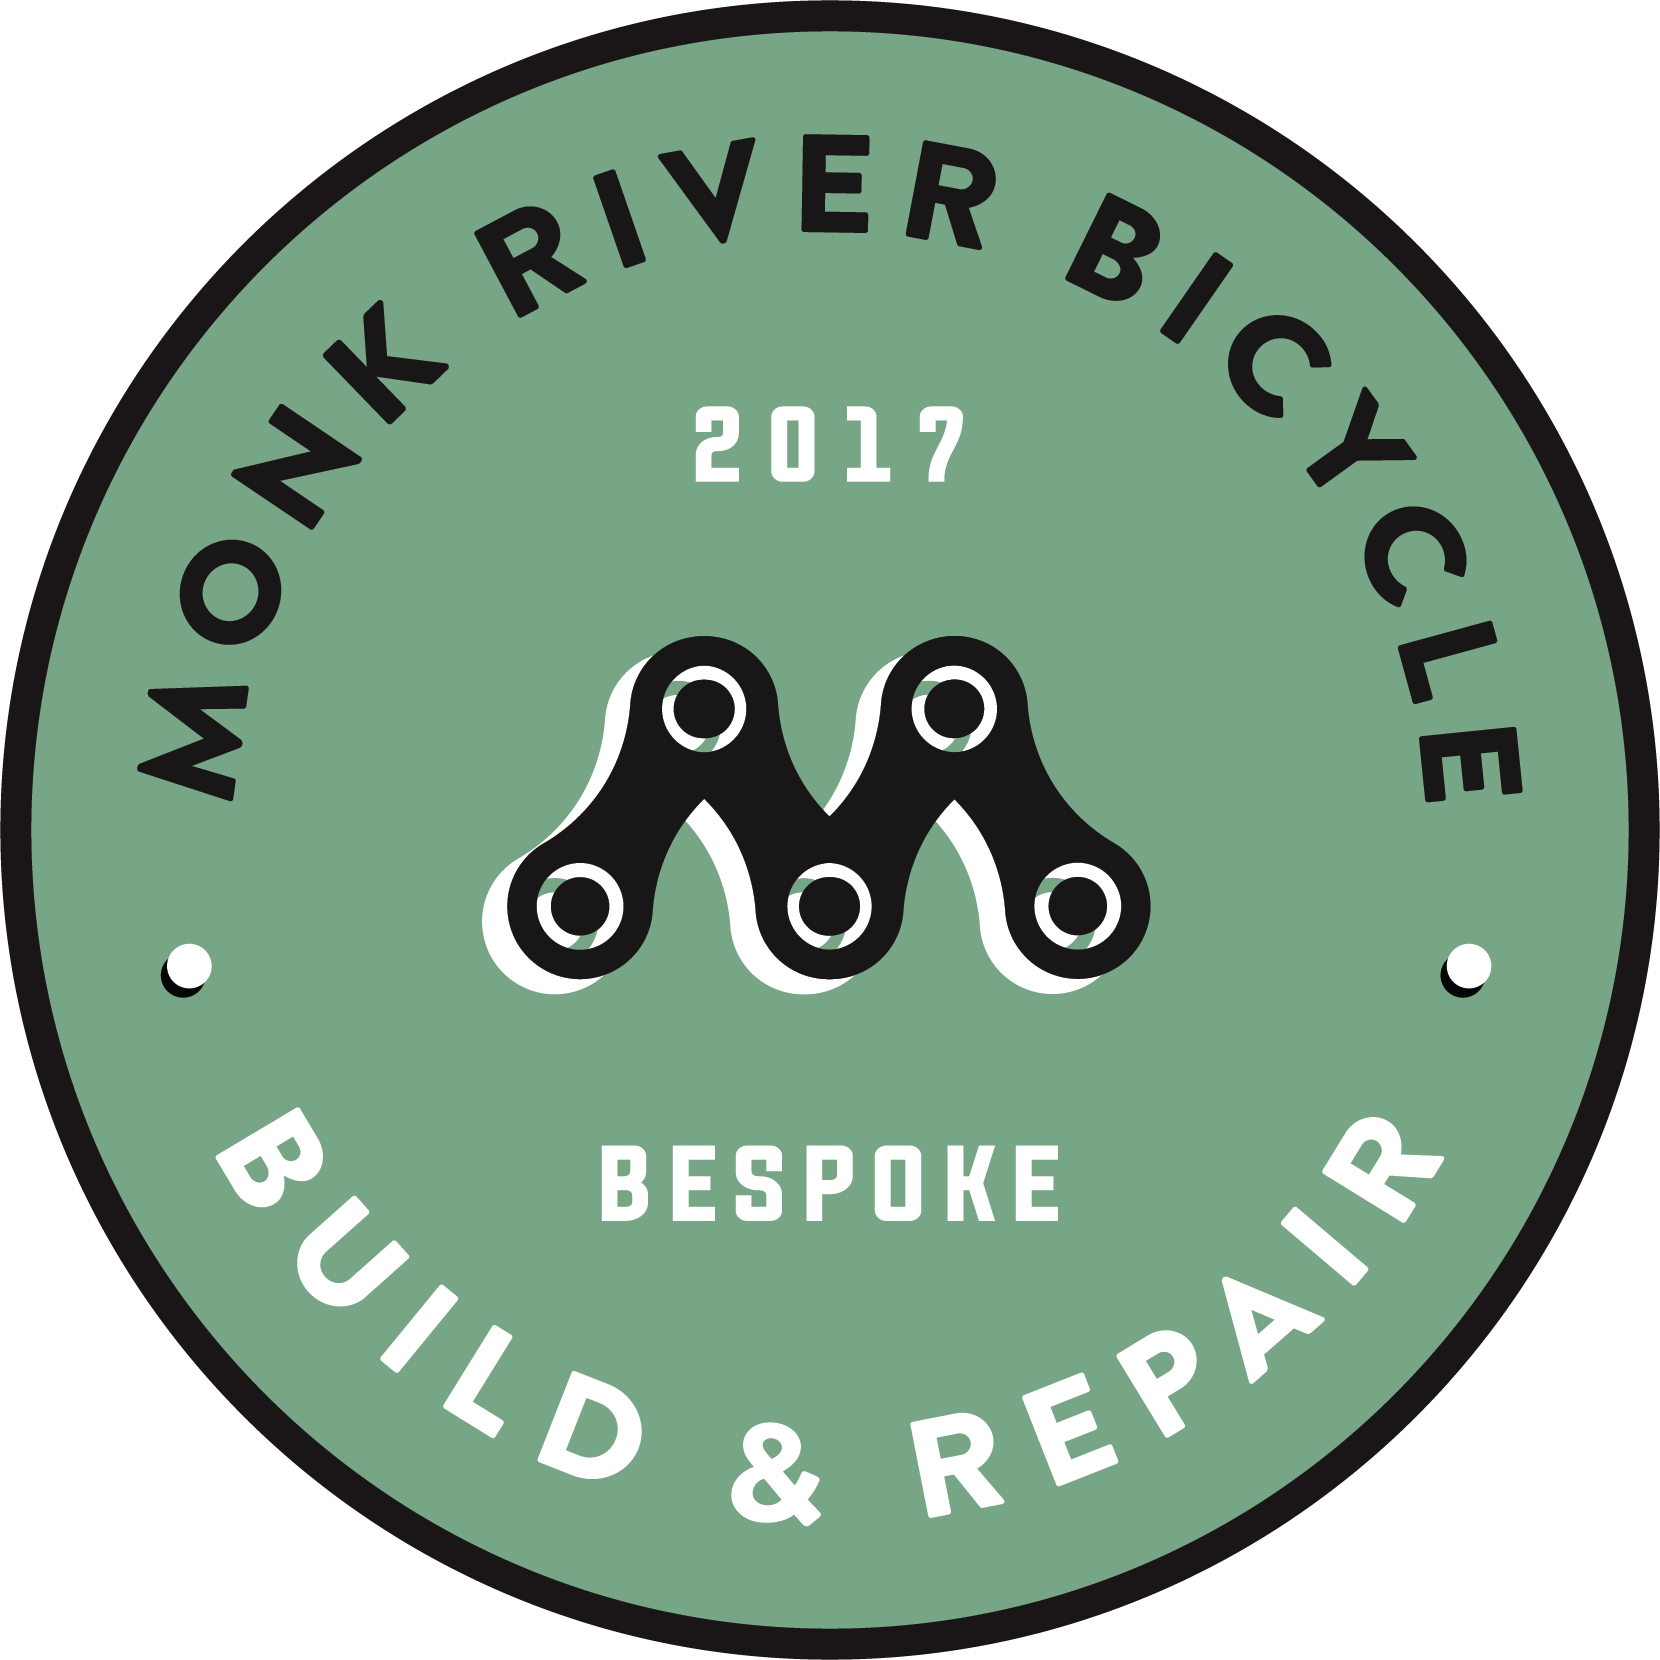 Monk River Bicycle